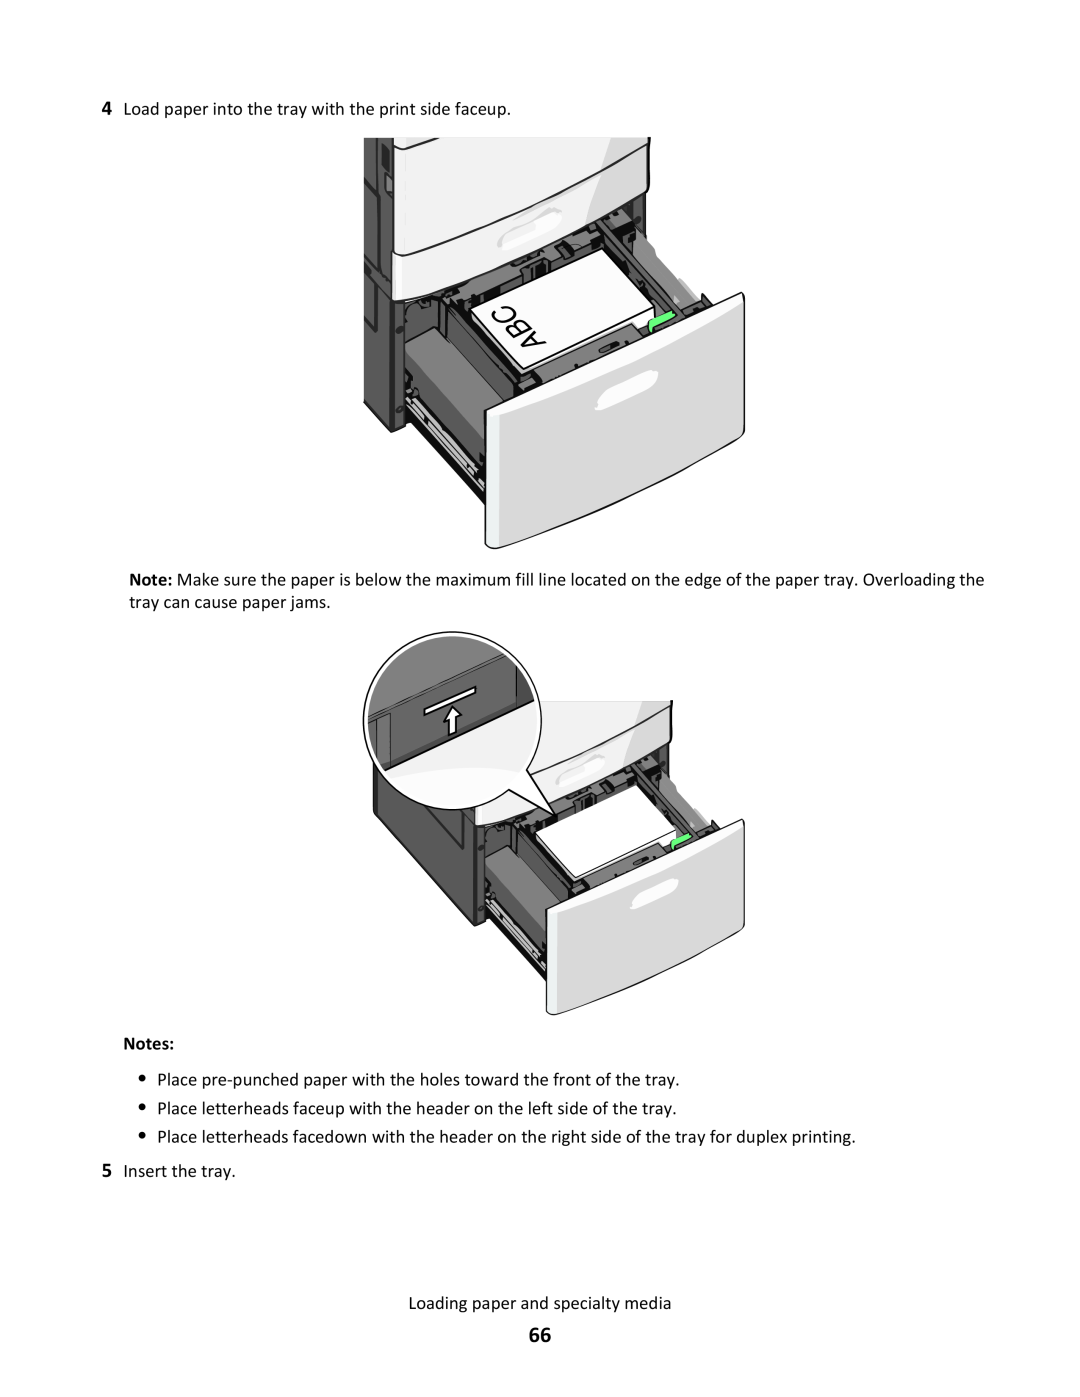 Lexmark C790 manual Load paper into the tray with the print side faceup, Insert the tray Loading paper and specialty media 